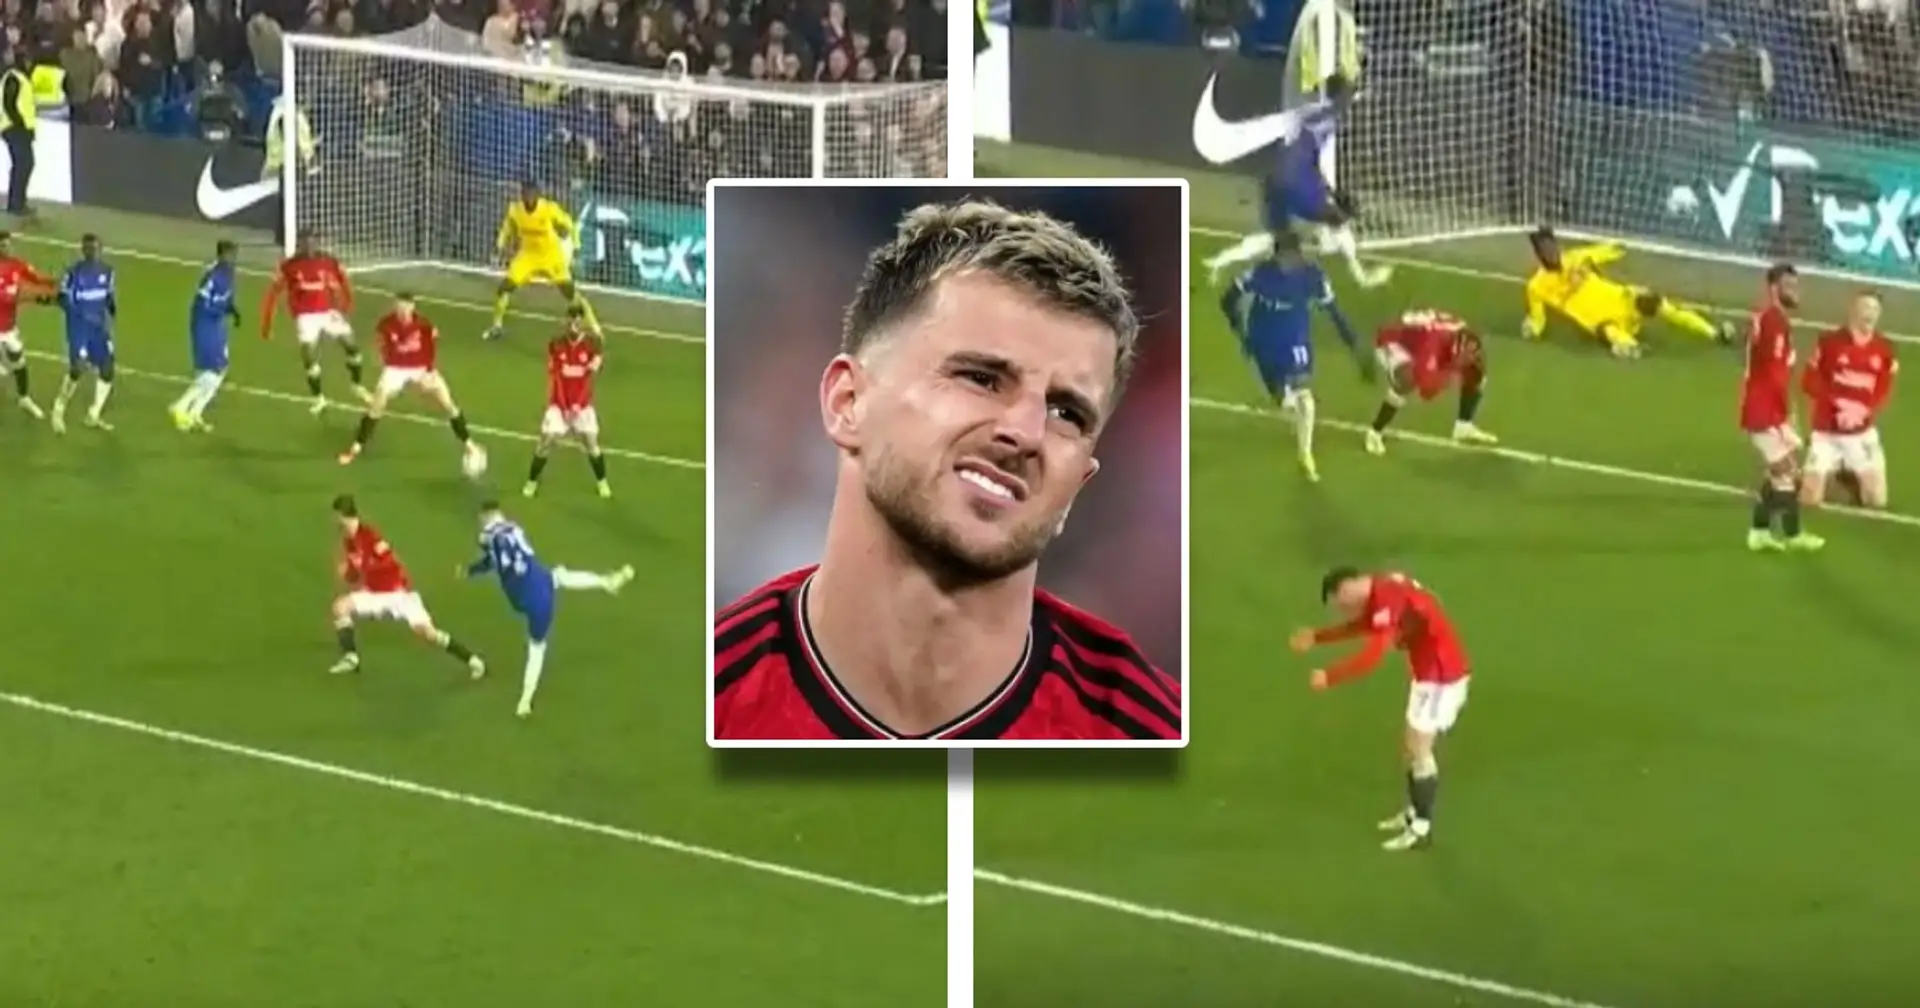 Mason Mount fails to cover Palmer as Cole scores dramatic winner v Man United - spotted